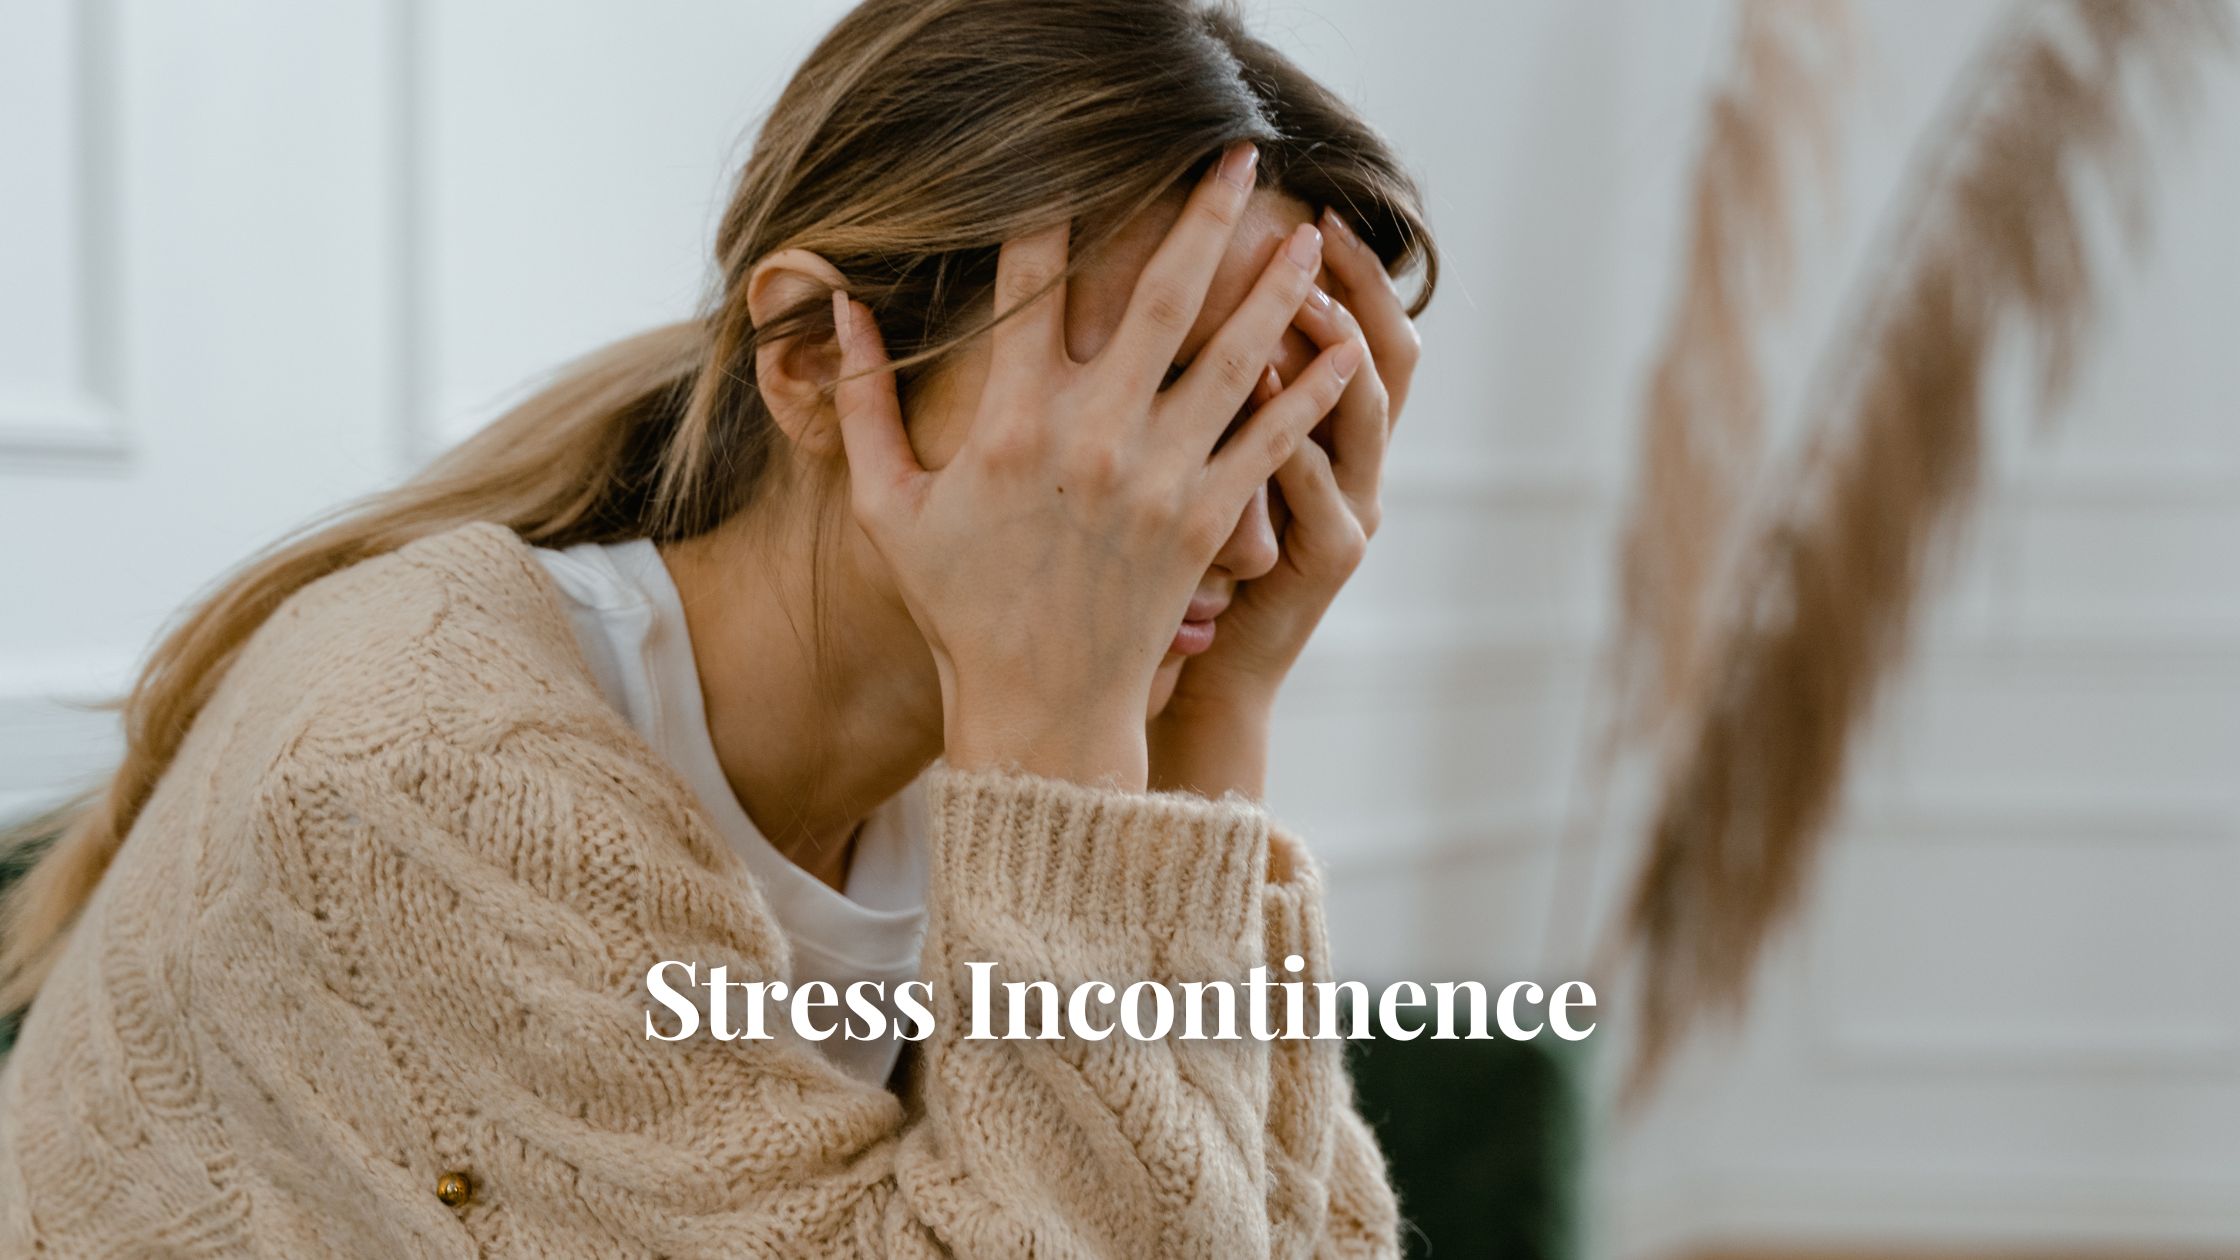 Stress incontinence